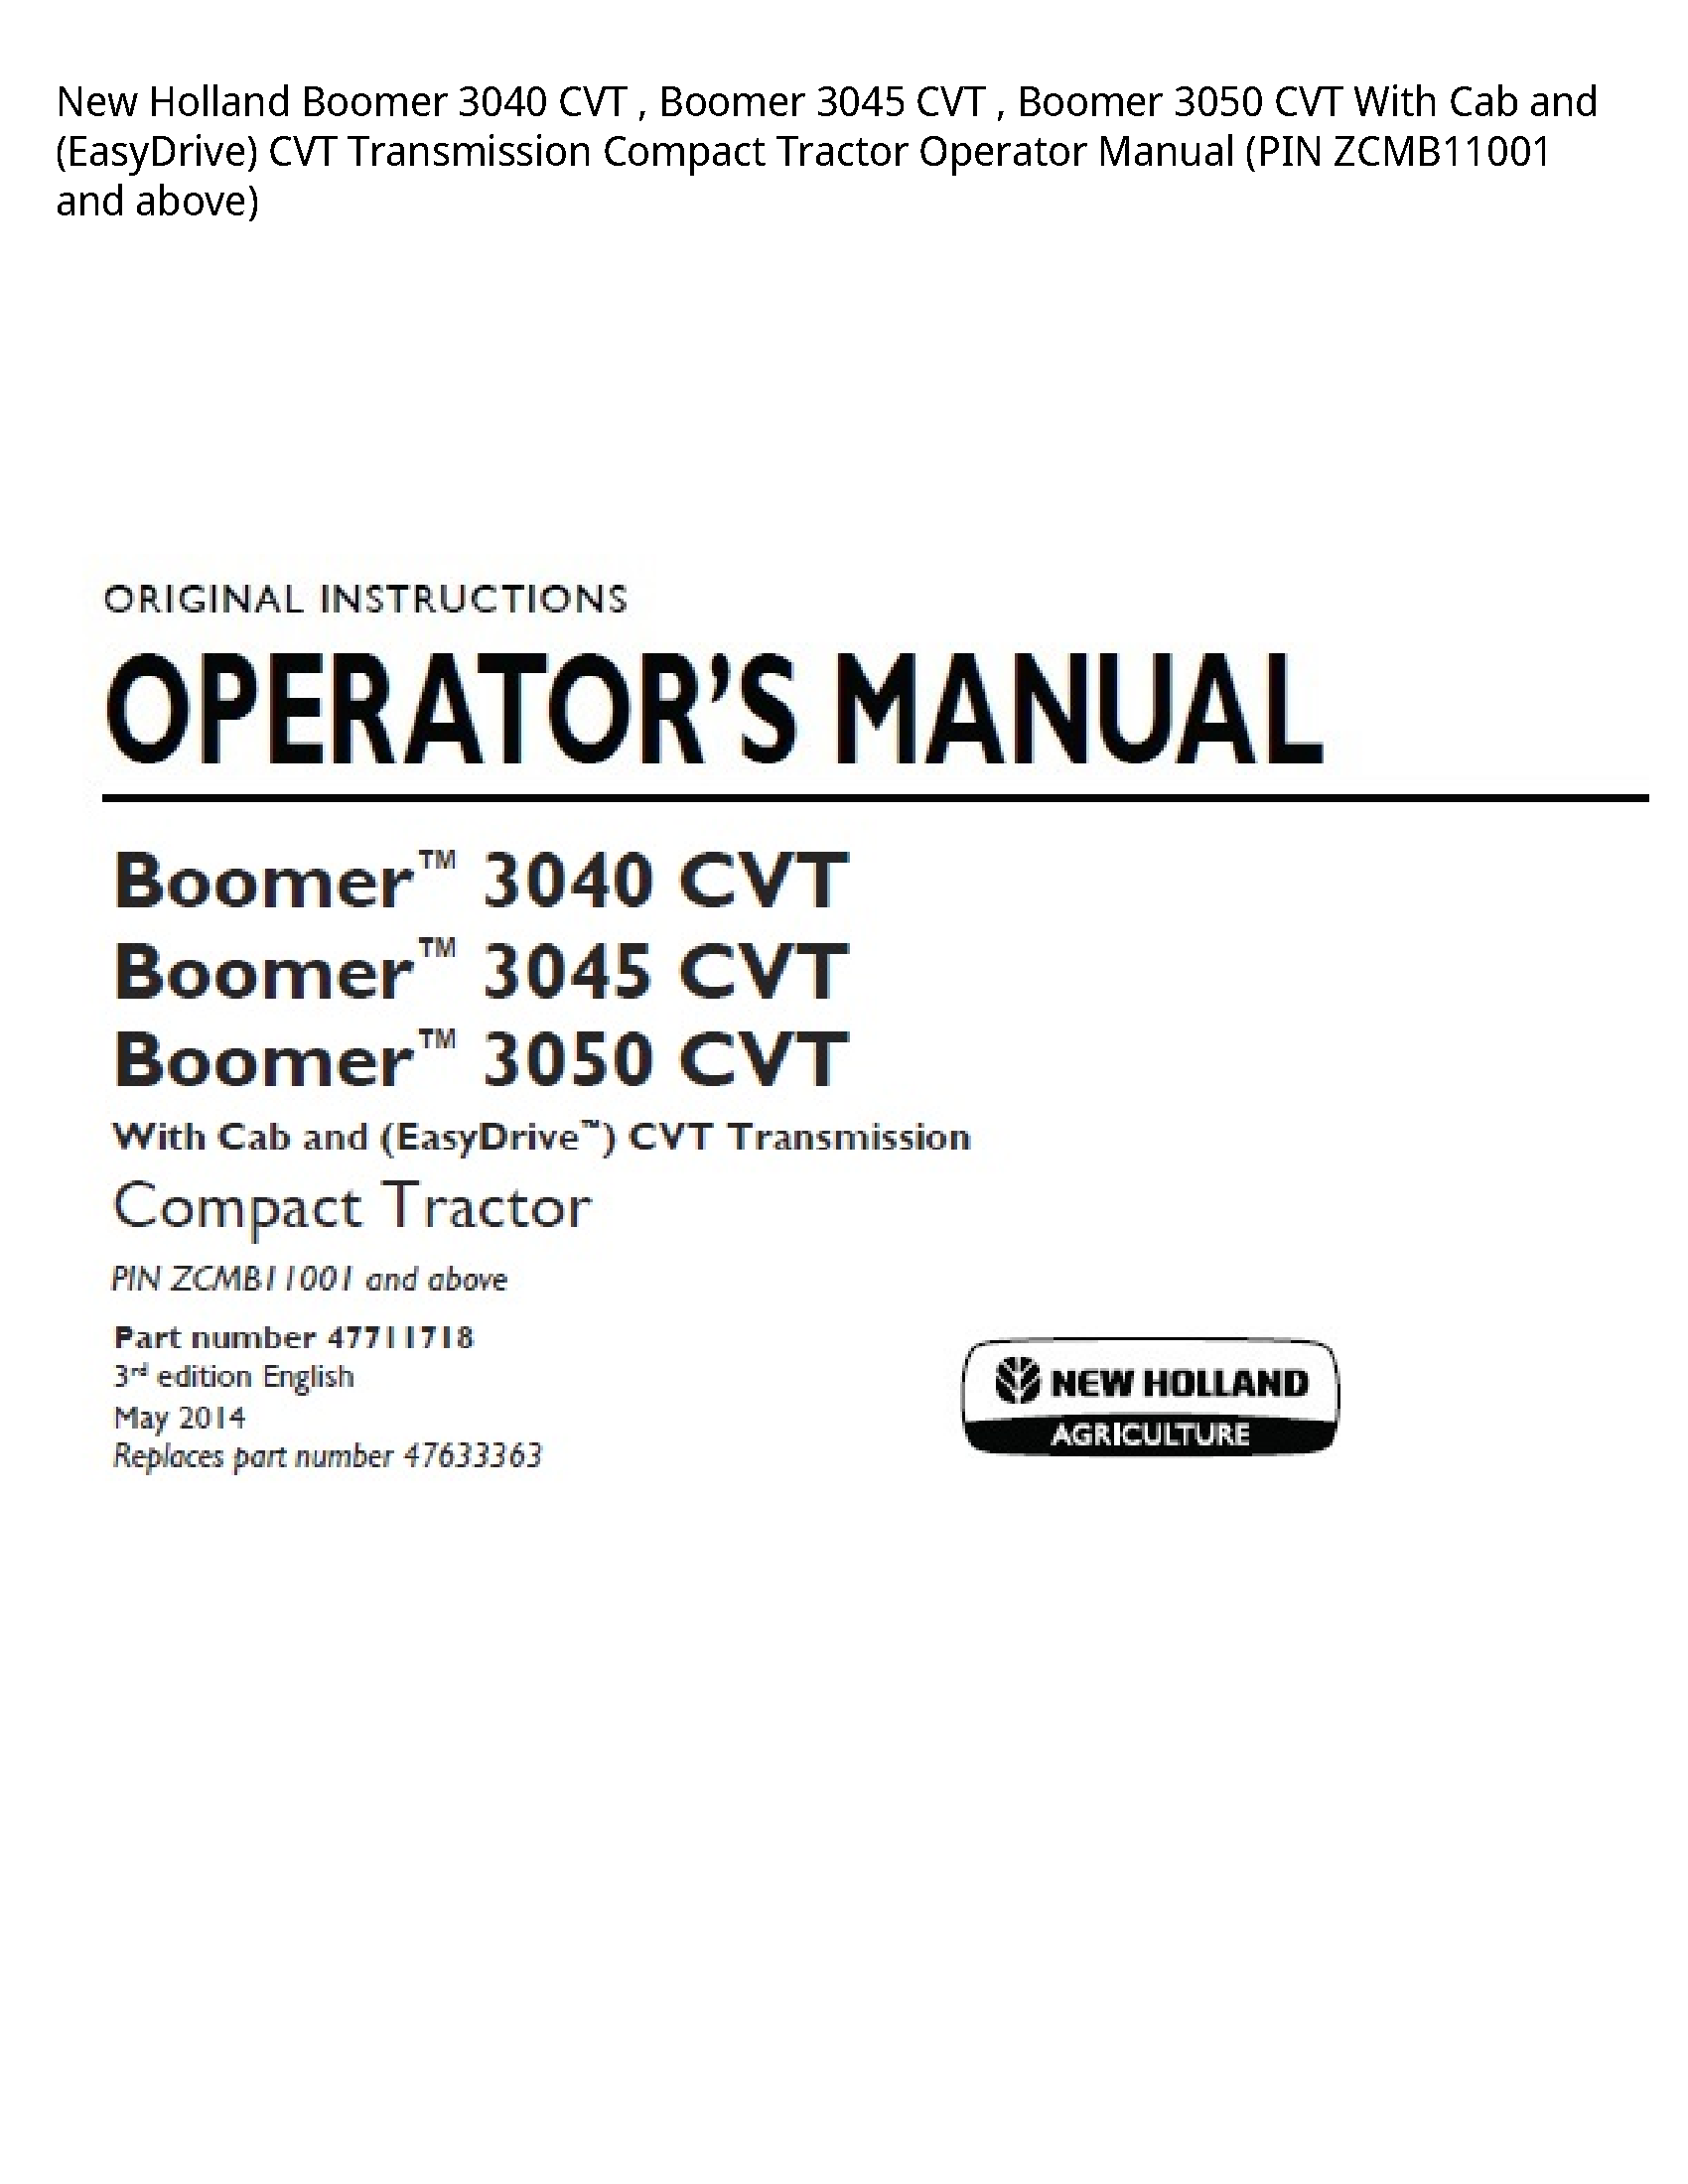 New Holland 3040 Boomer CVT Boomer CVT Boomer CVT With Cab  (EasyDrive) CVT Transmission Compact Tractor Operator manual